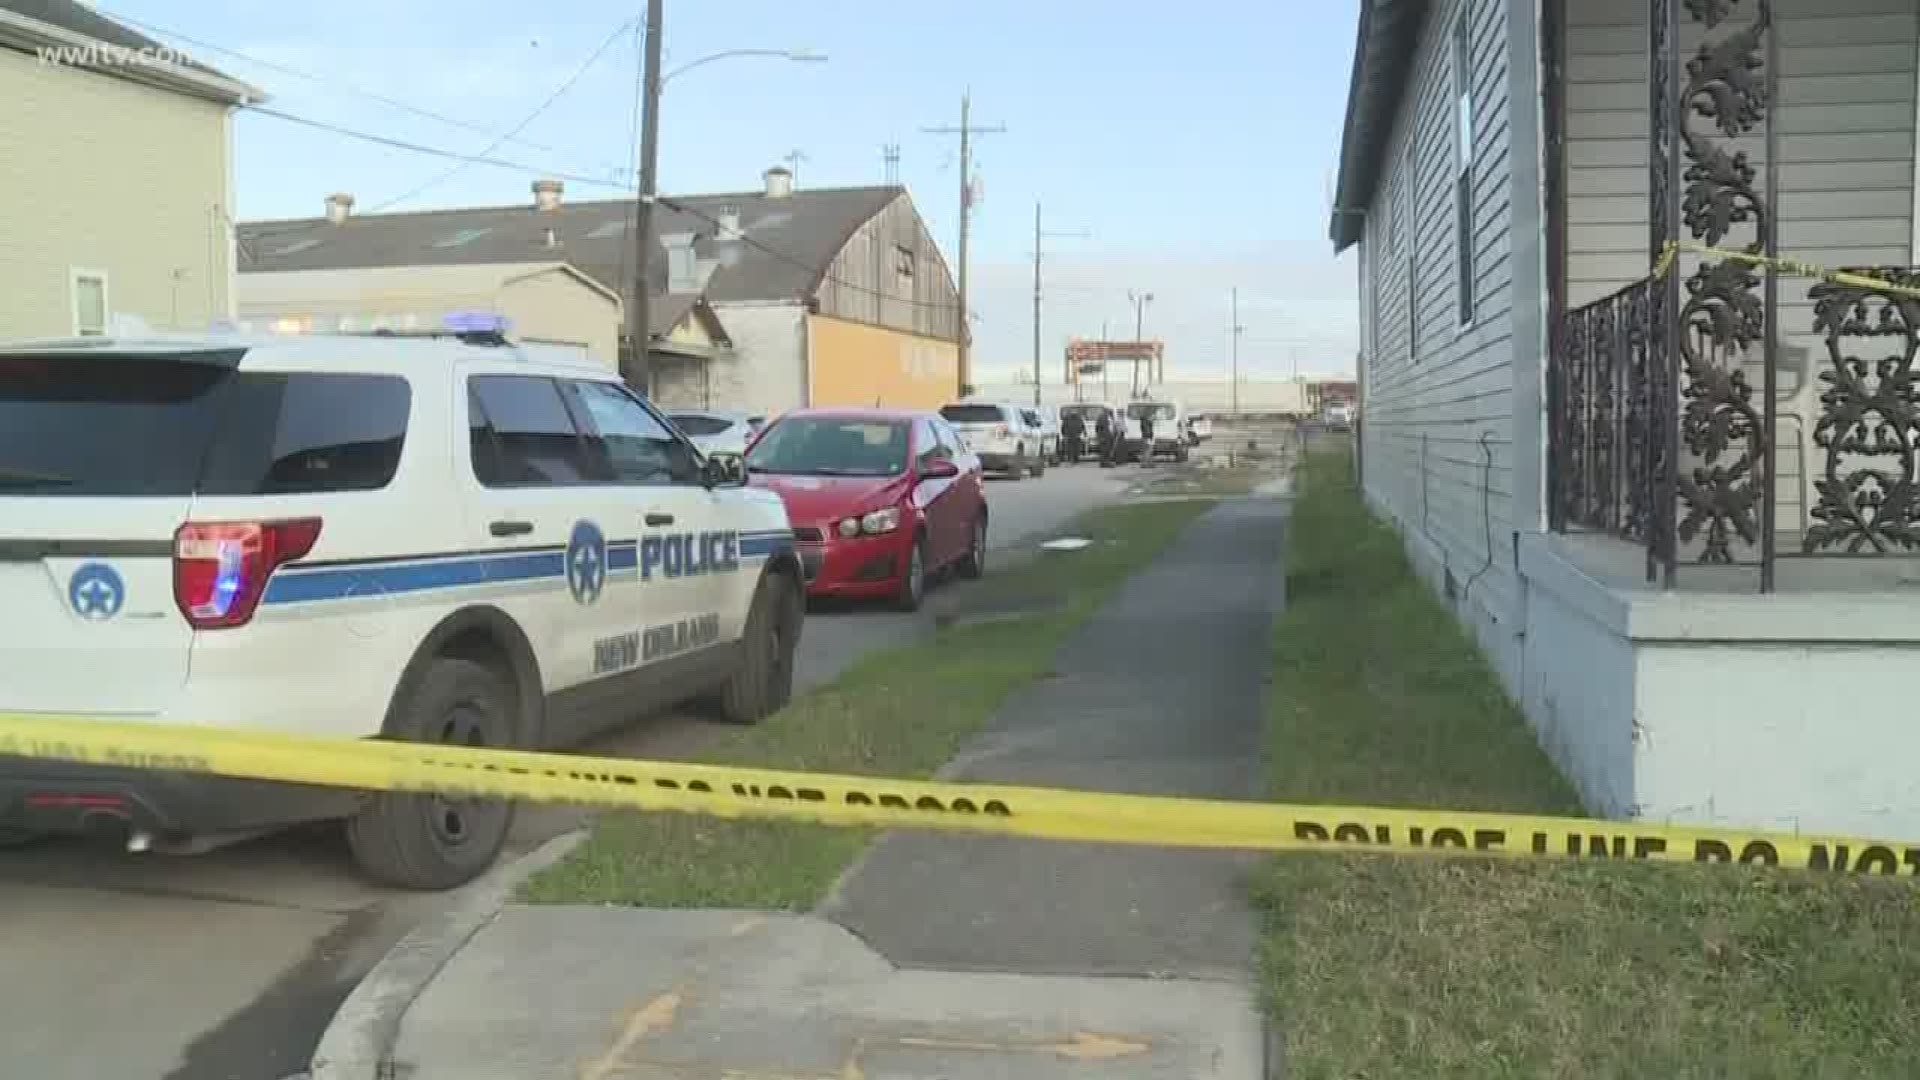 Police say the boy was shot in the chest in the 2700 block of N. Miro Street on Saturday afternoon.